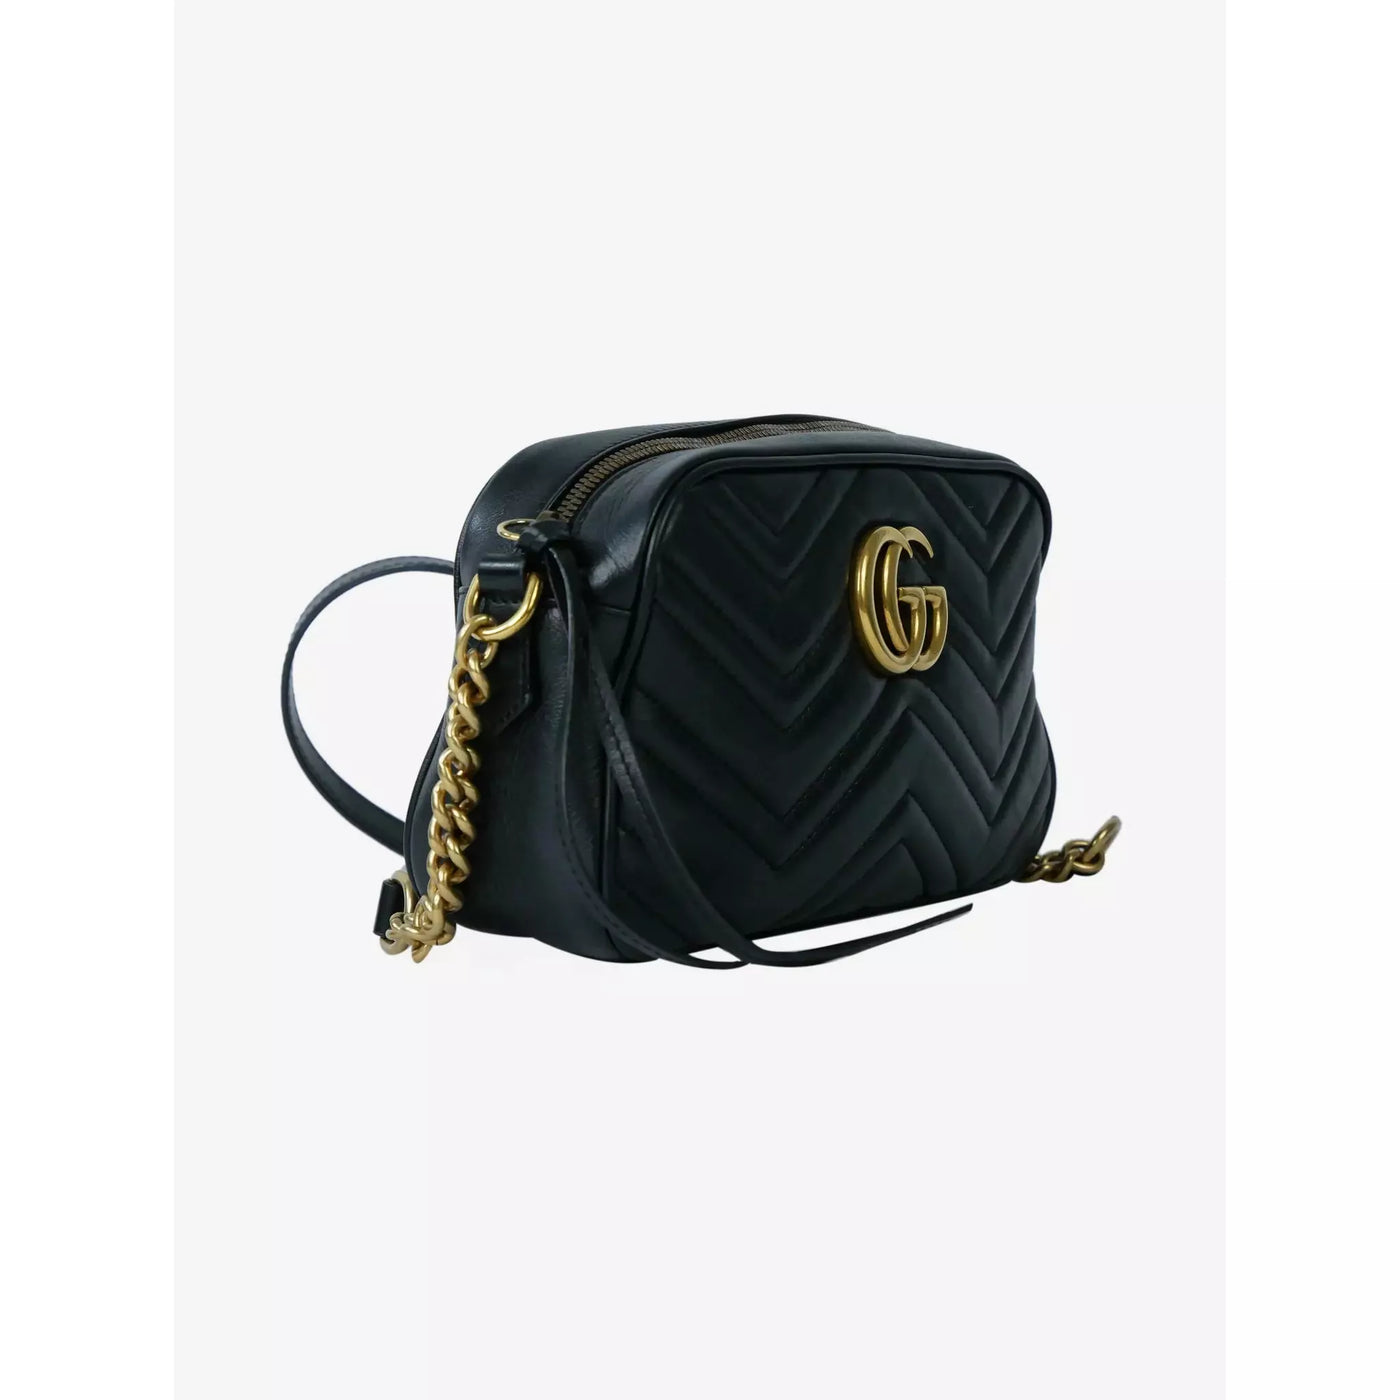 Gucci Black GG Marmont small leather cross-body bag